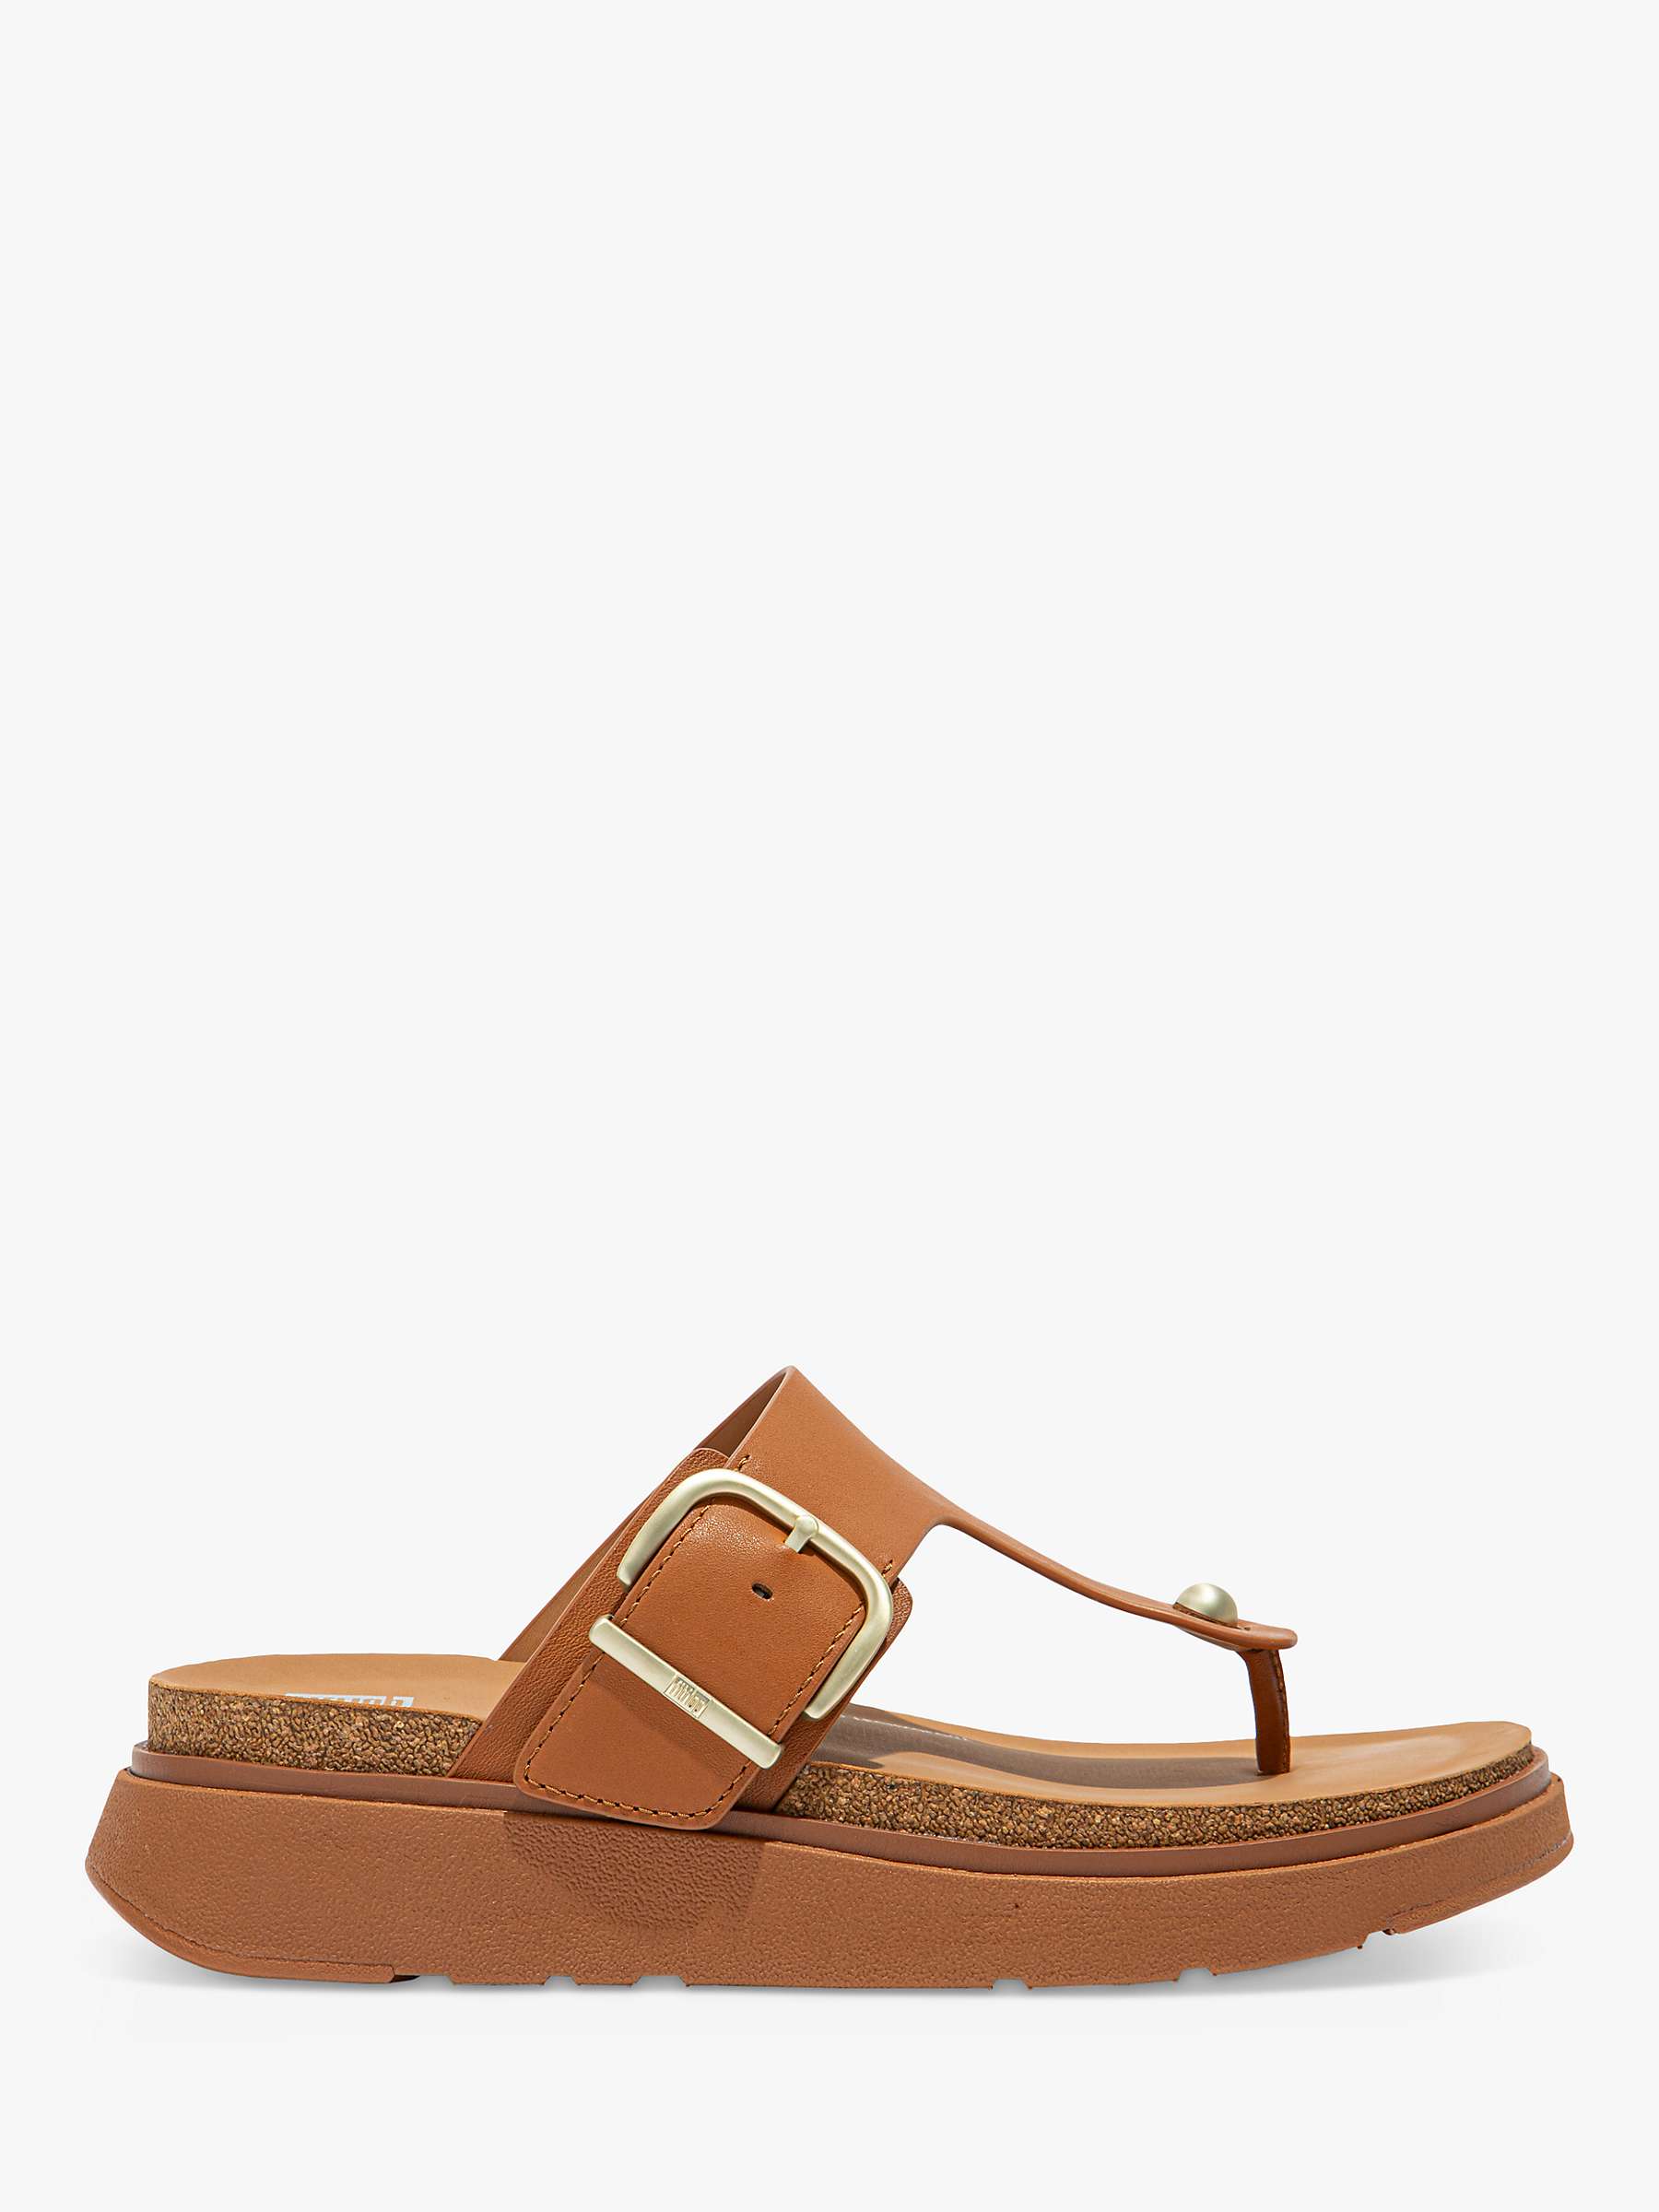 Buy FitFlop Leather Thong Wedge Sandals, Tan Online at johnlewis.com